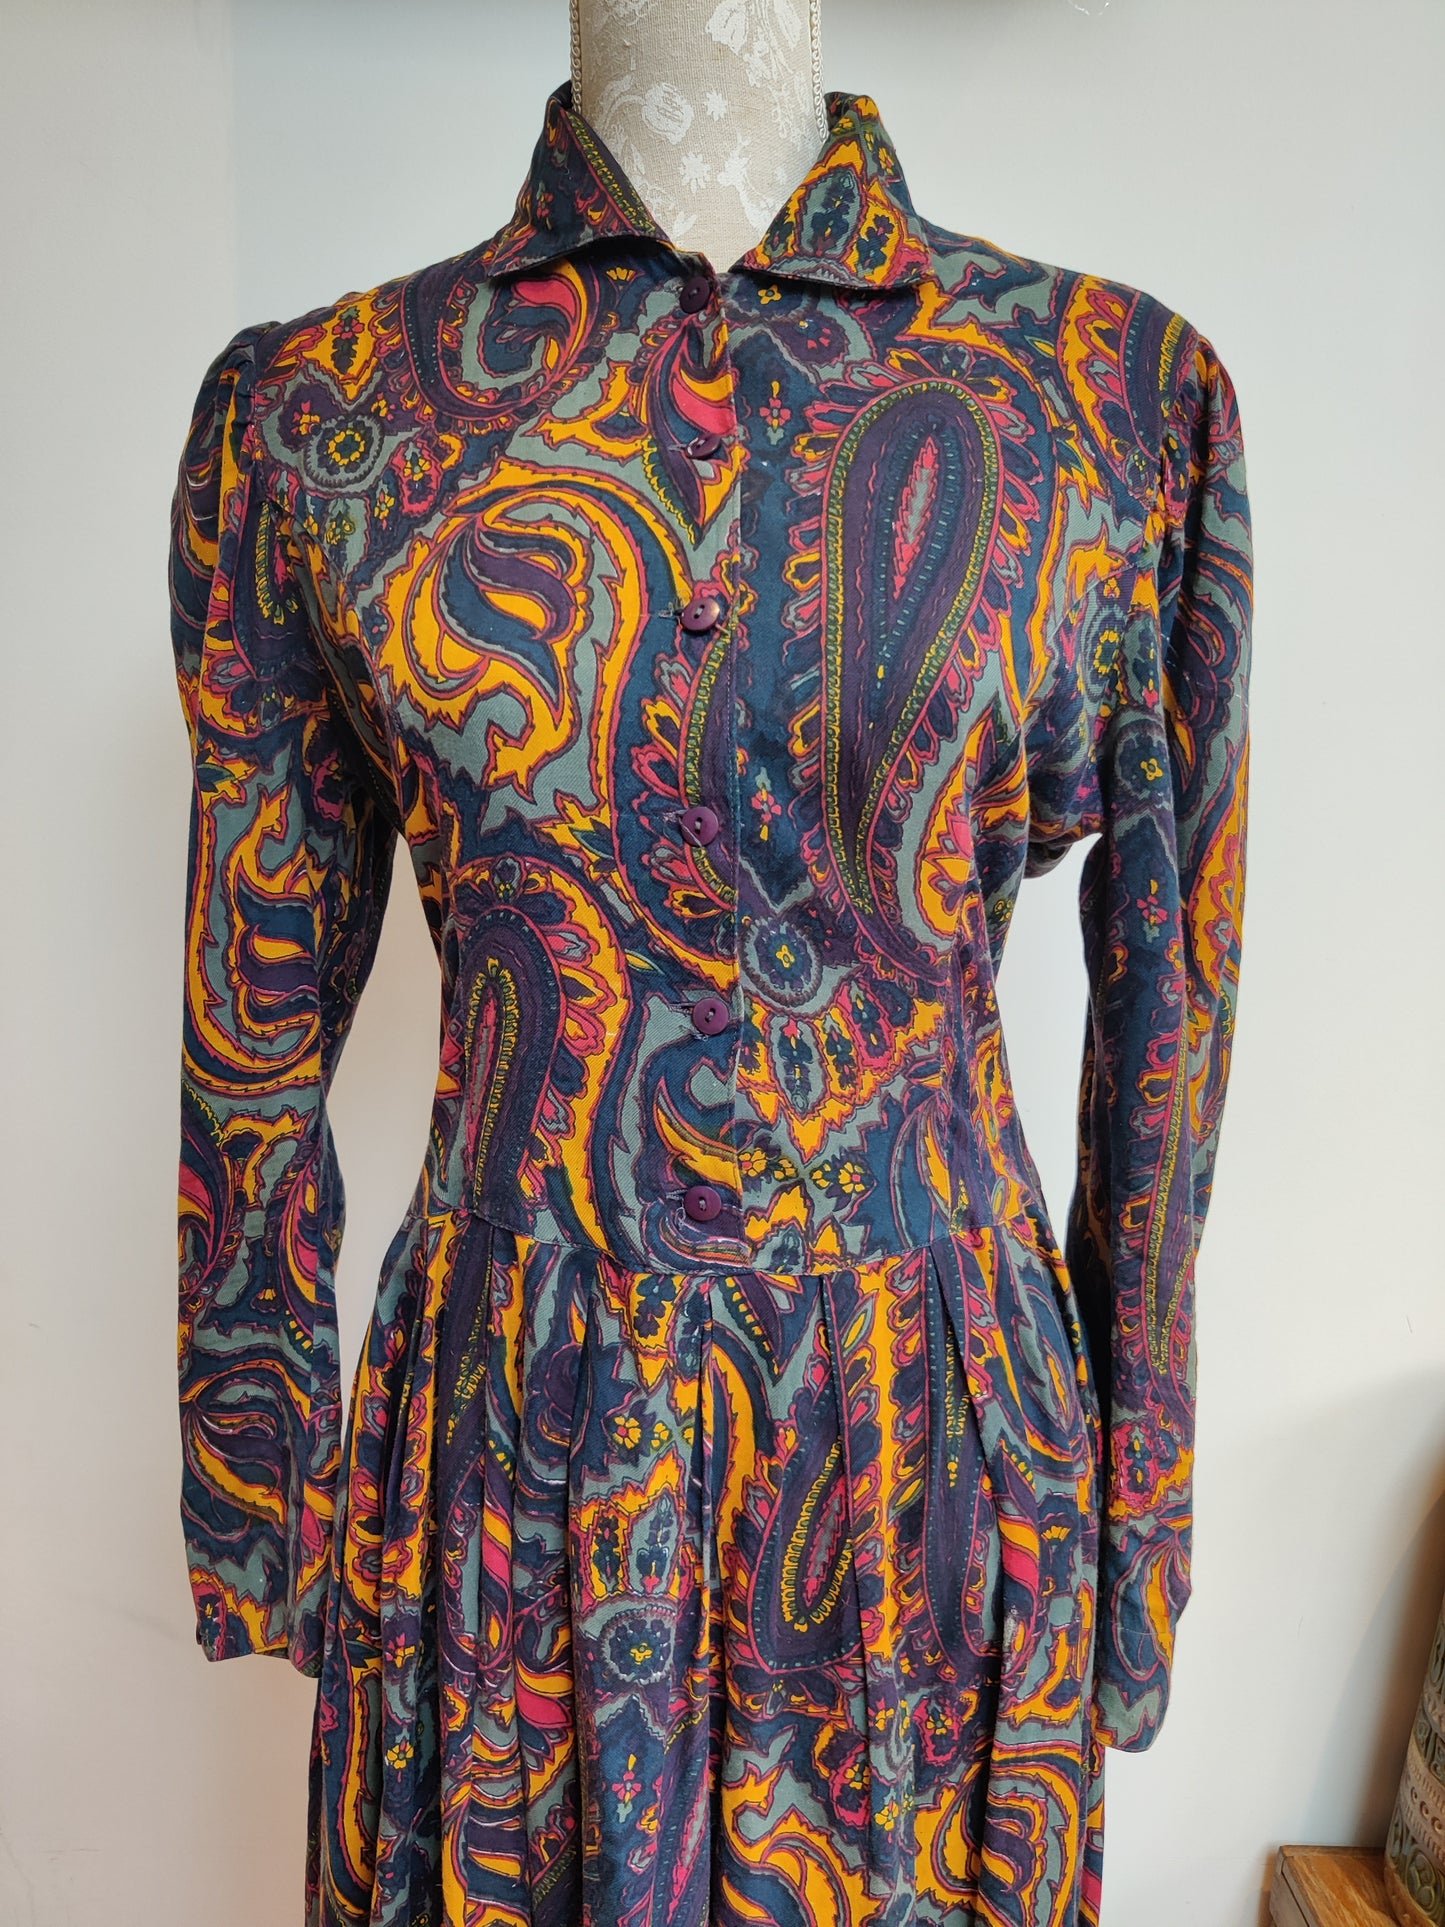 Vintage paisley dress with buttons